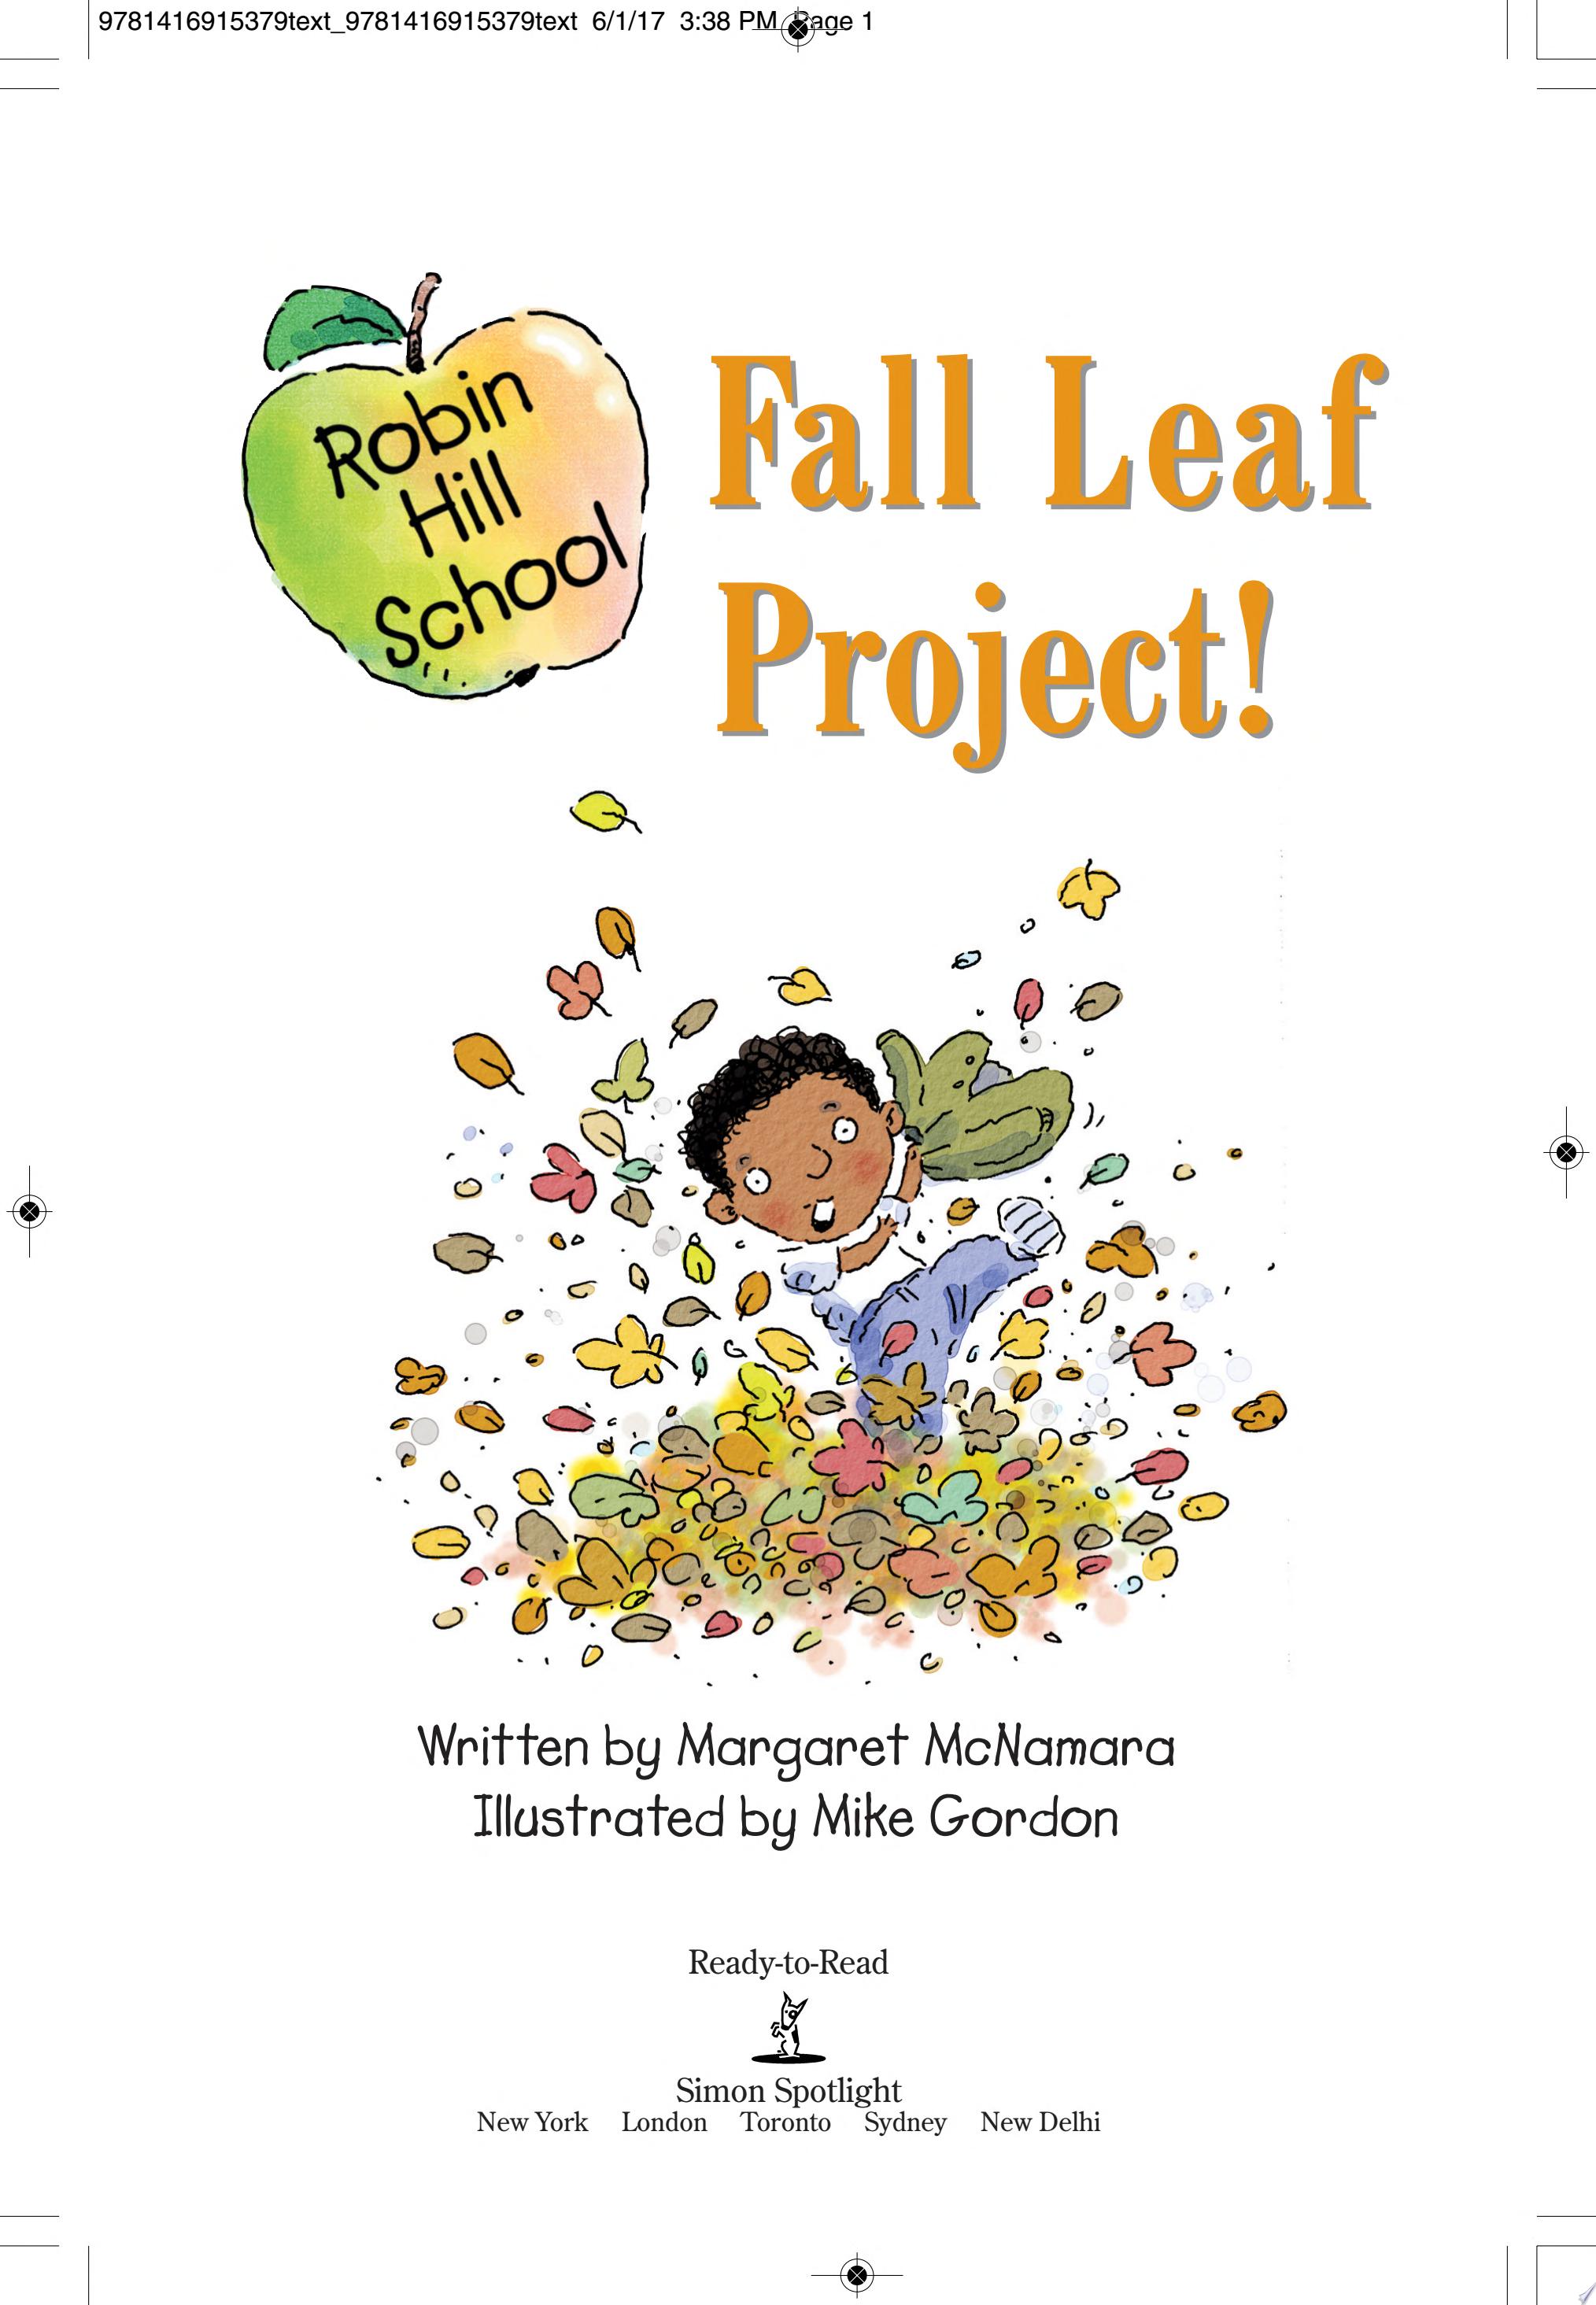 Image for "Fall Leaf Project"